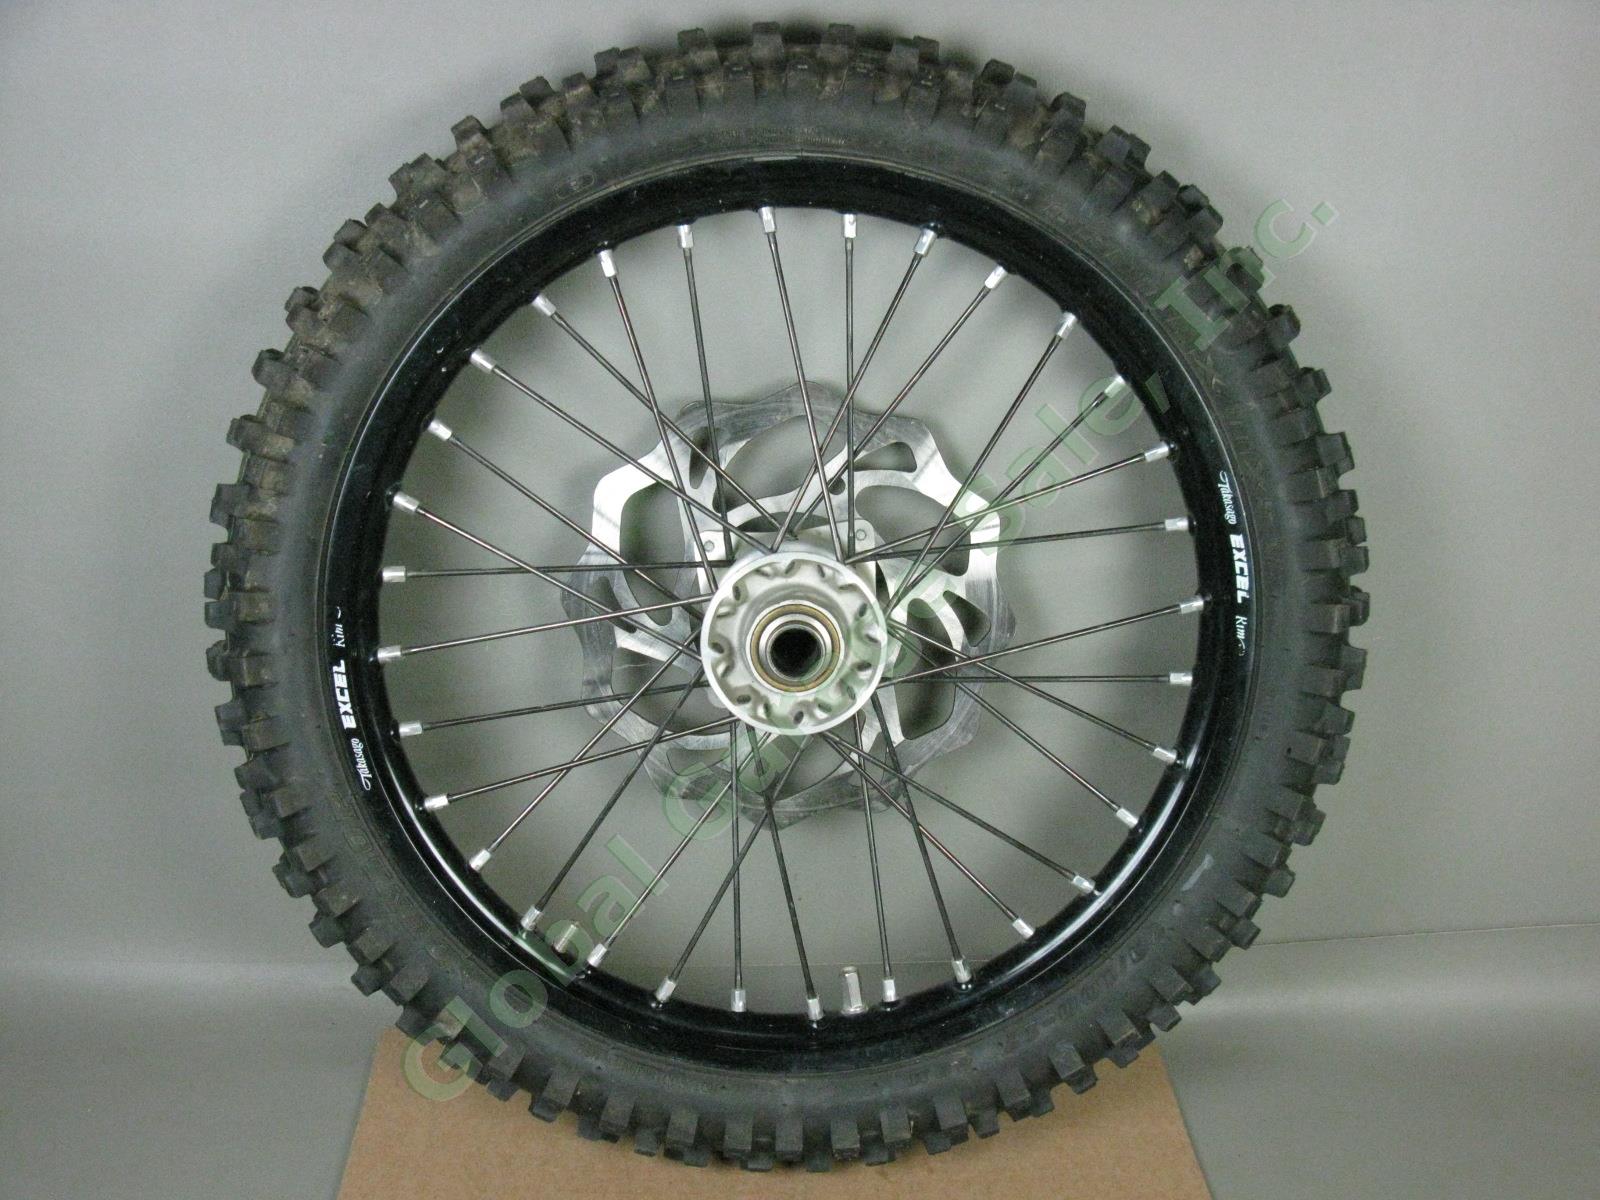 2013-2016 KTM-85 Takasago Excel Black Front Wheel J 17x1.40 + Tire Used One Lap! 2